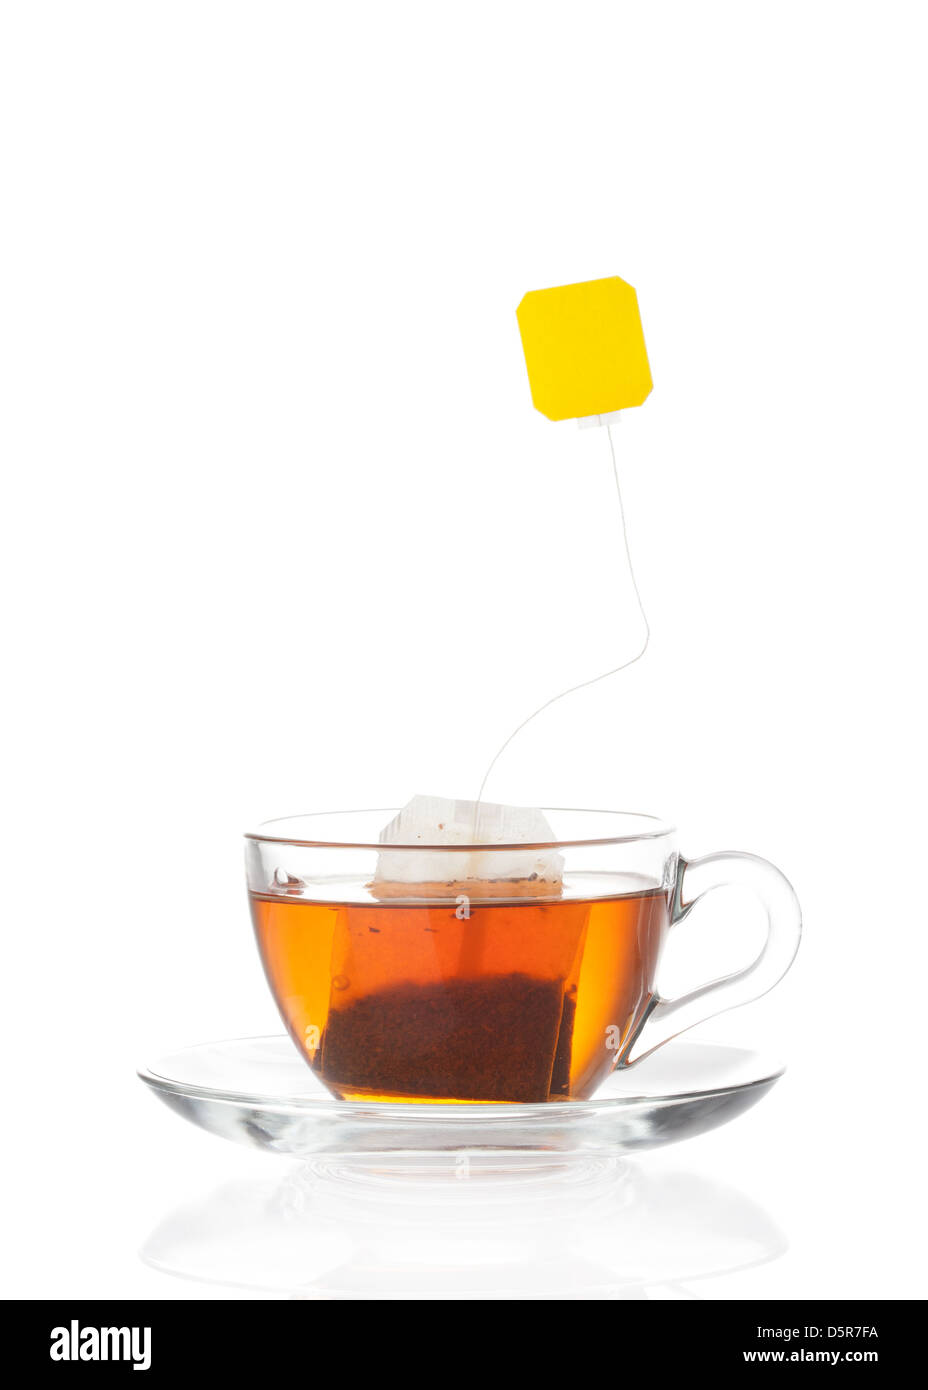 Hot tea in transparent glass cup with label Stock Photo